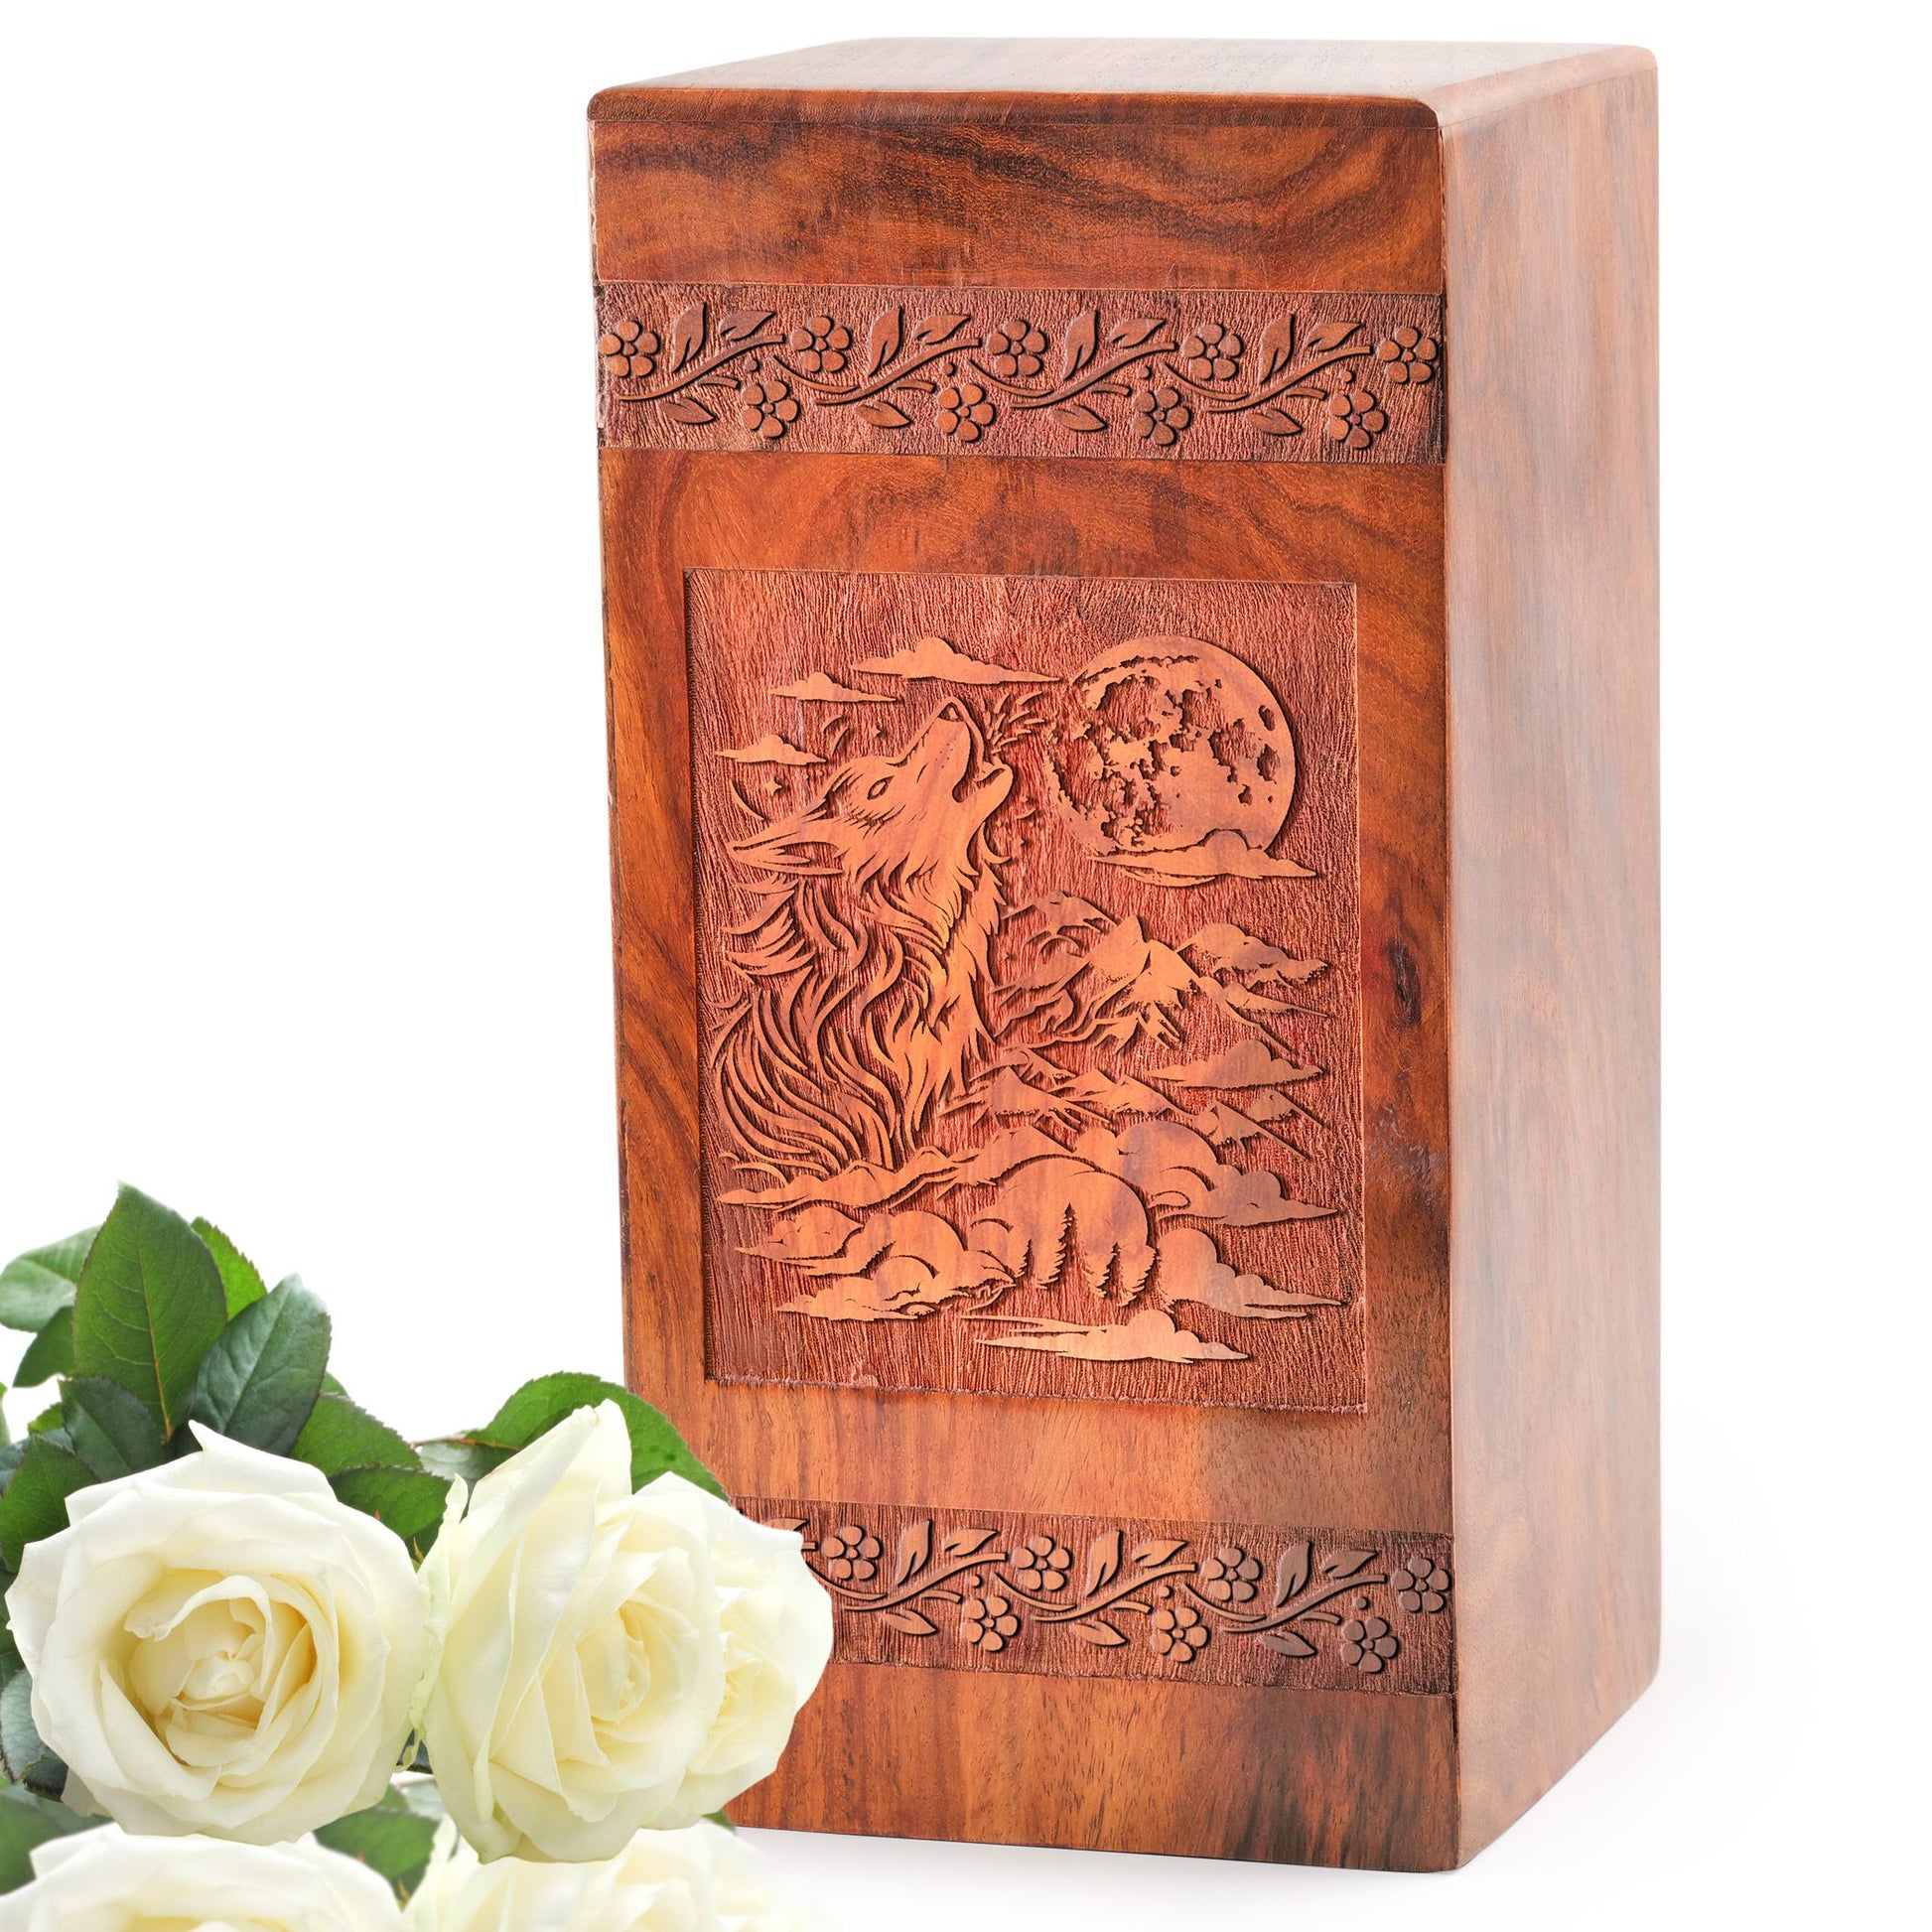 Elegant Wolf Wooden Cremation Urn | Handcrafted For Storing Human Ashes